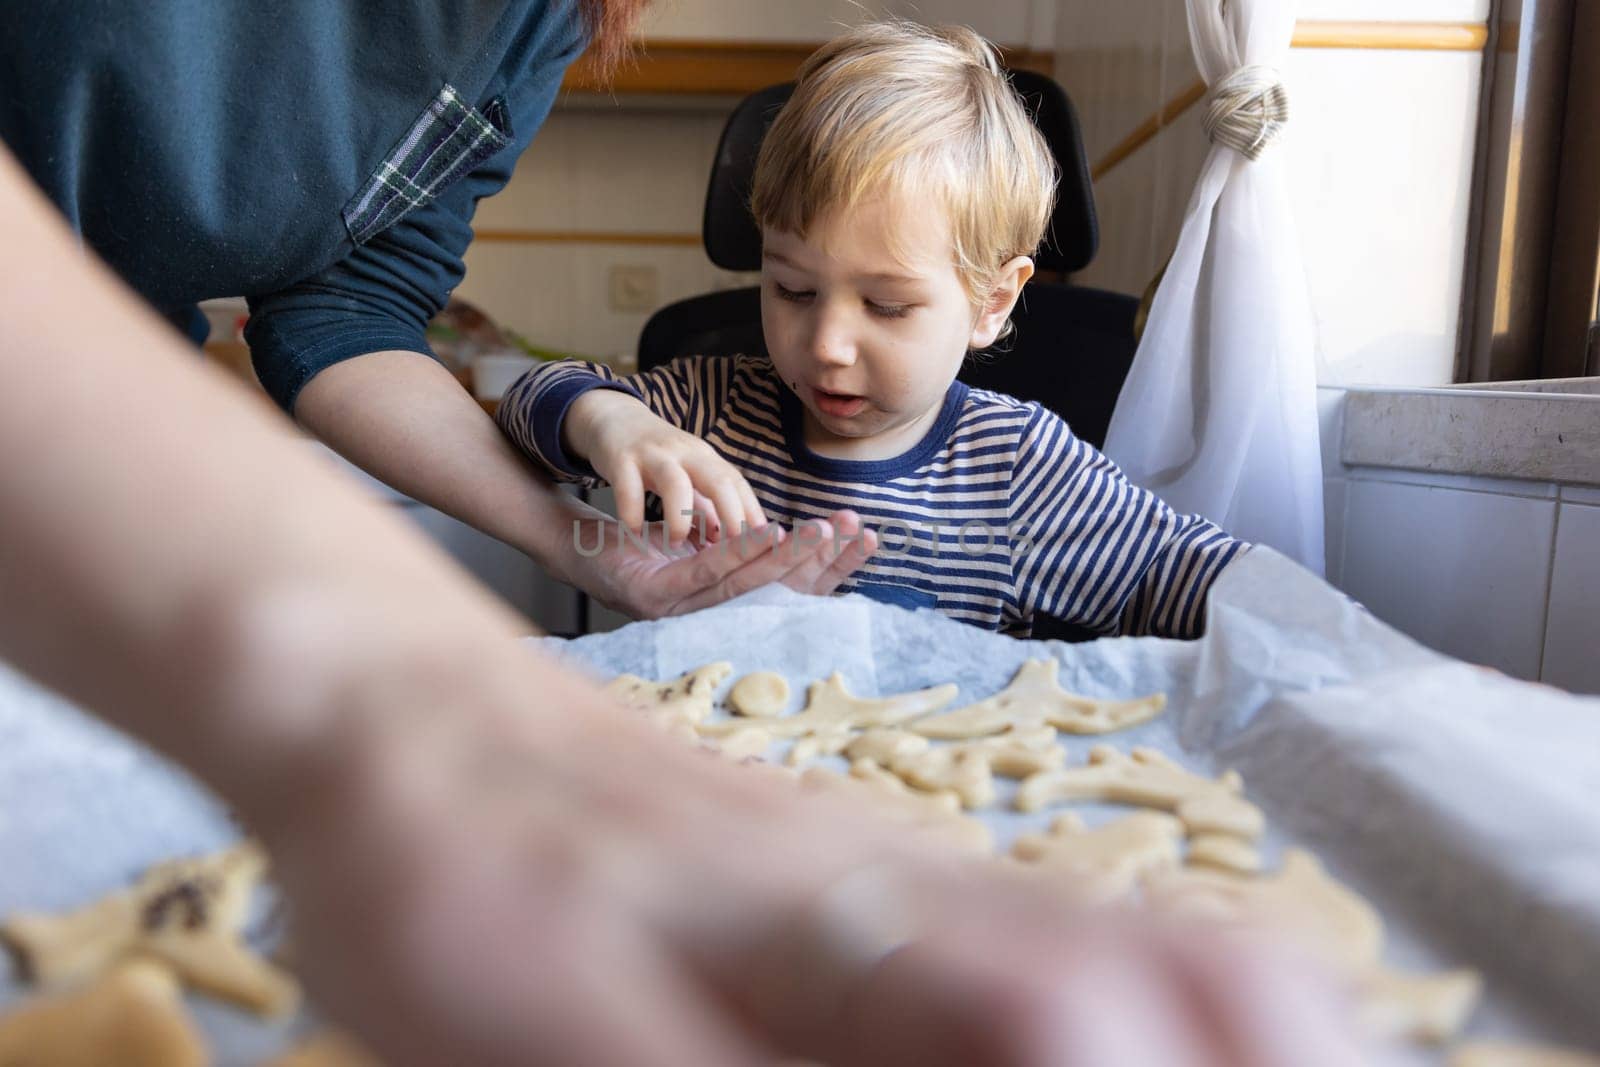 Family making cookies - a little boy takes a sprinkling from the palm of his mother by Studia72